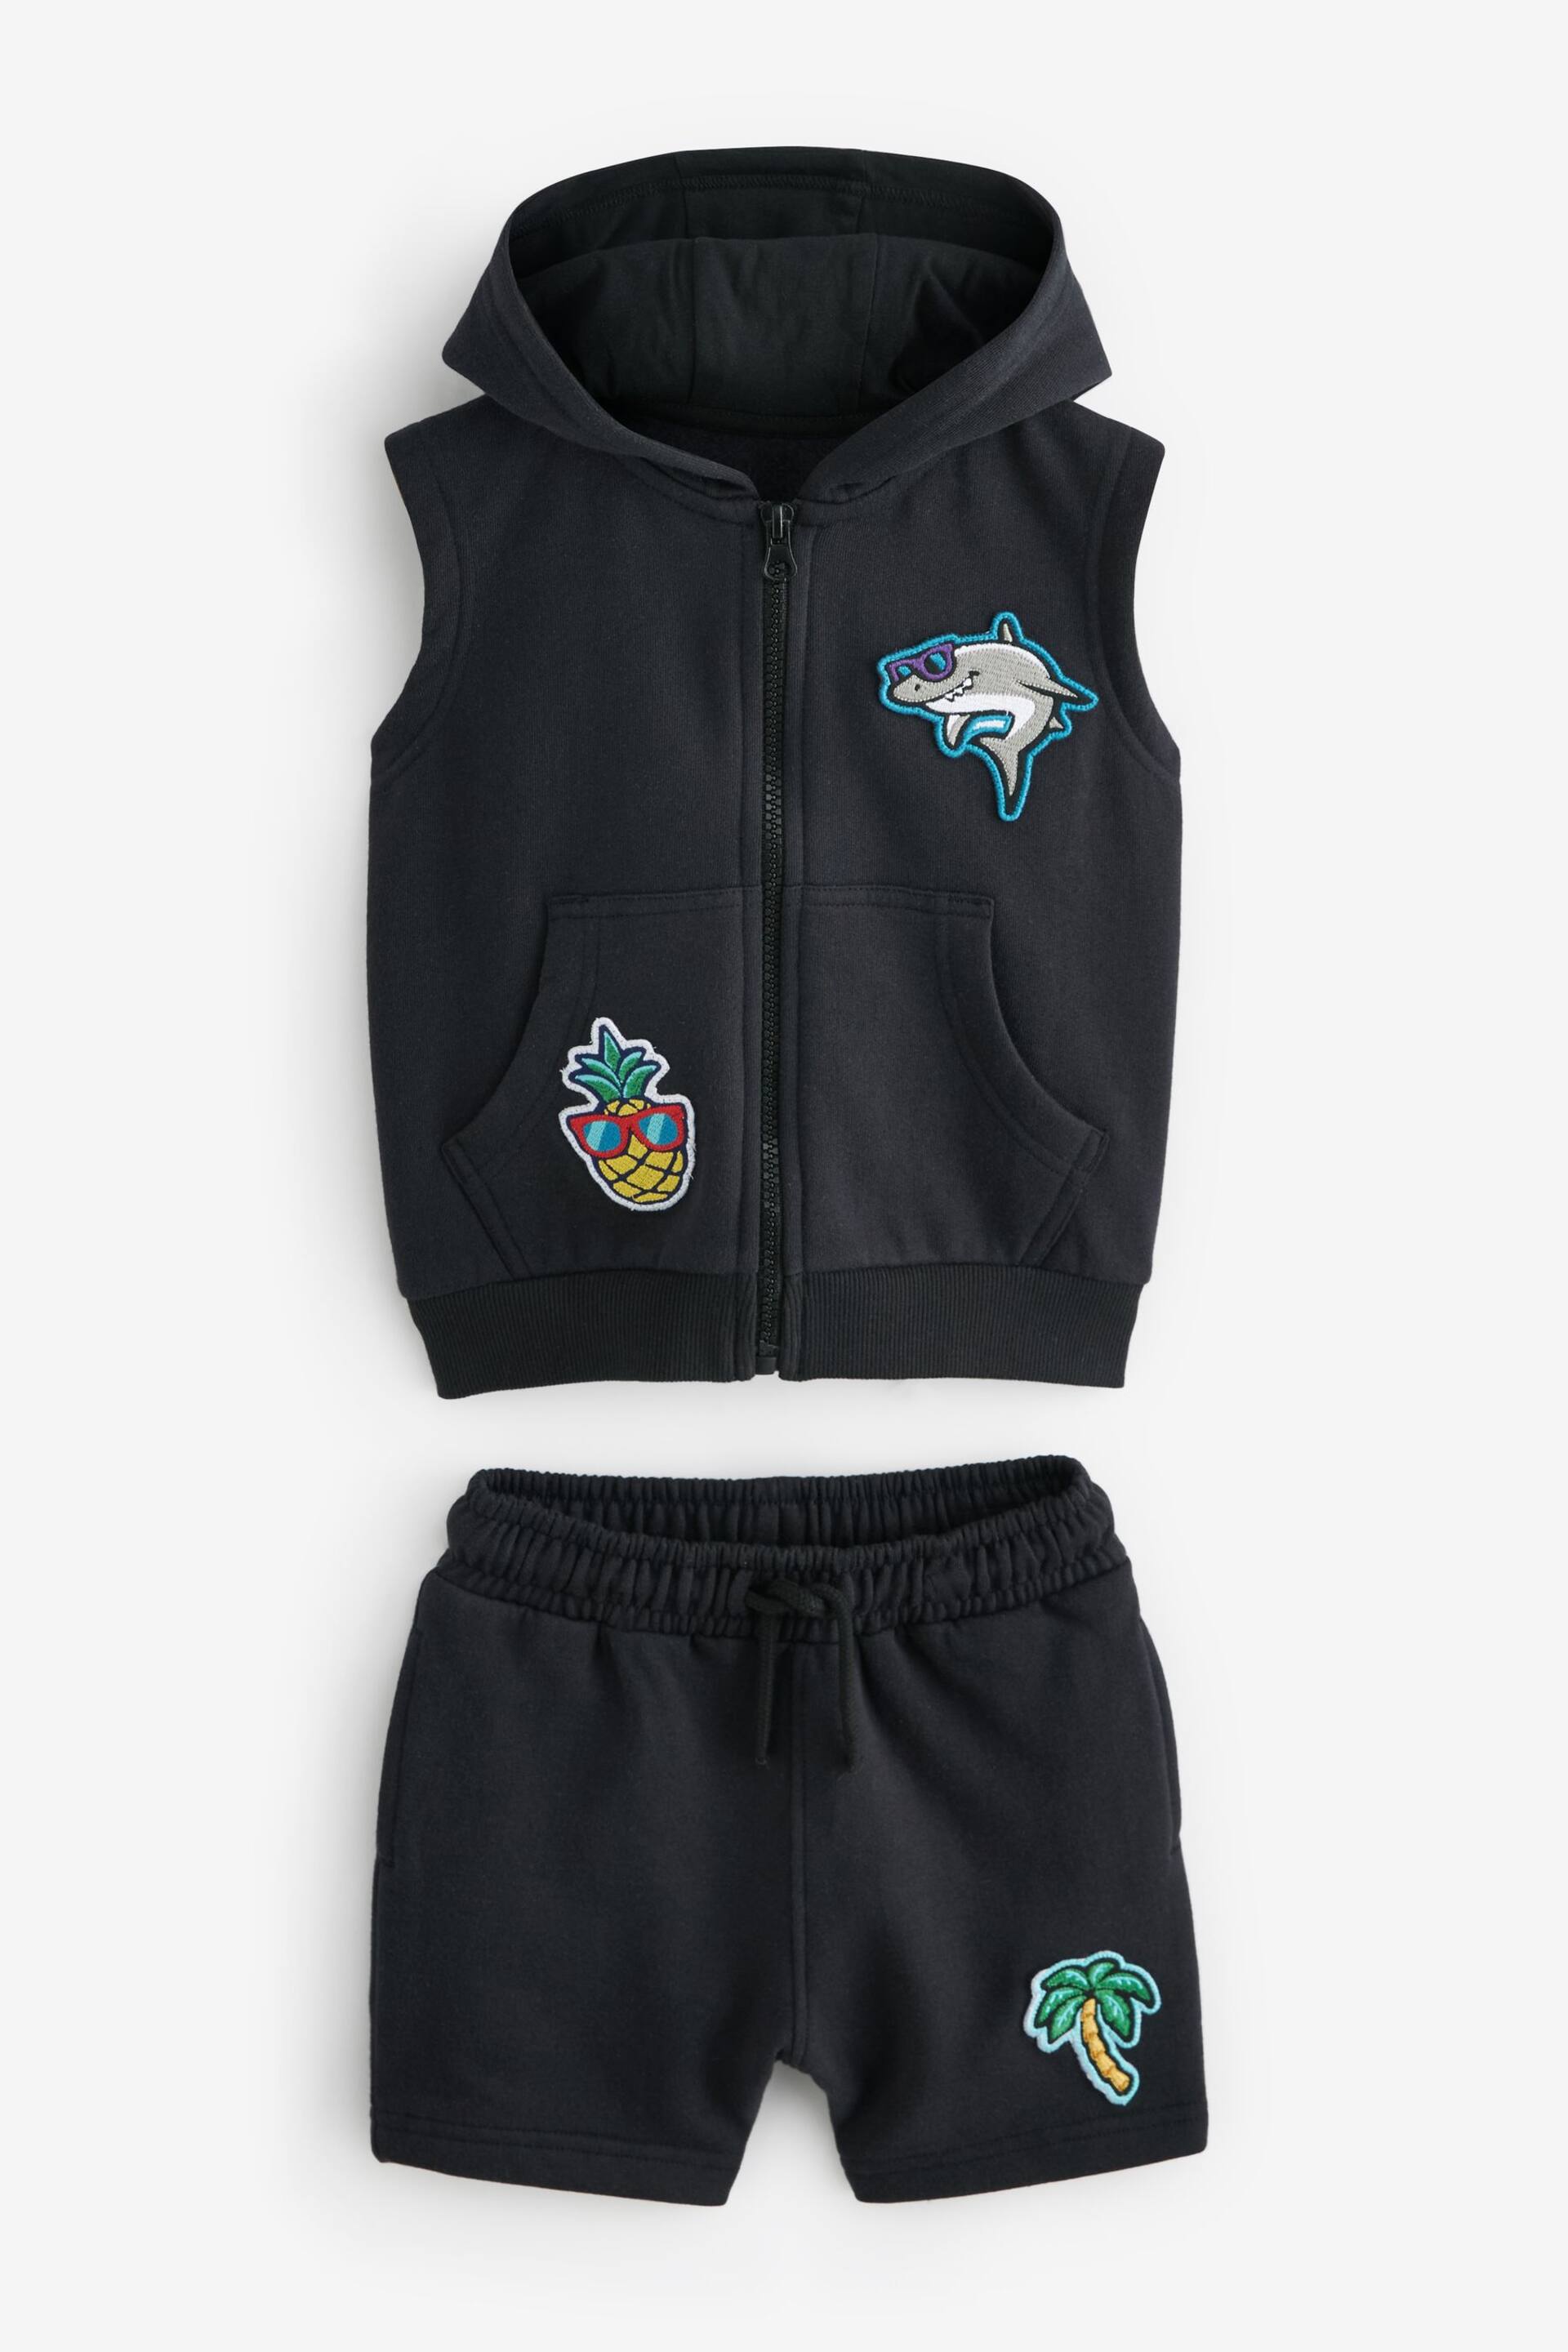 Charcoal Grey Hoodie Gilet and Shorts Set (3mths-7yrs) - Image 1 of 3